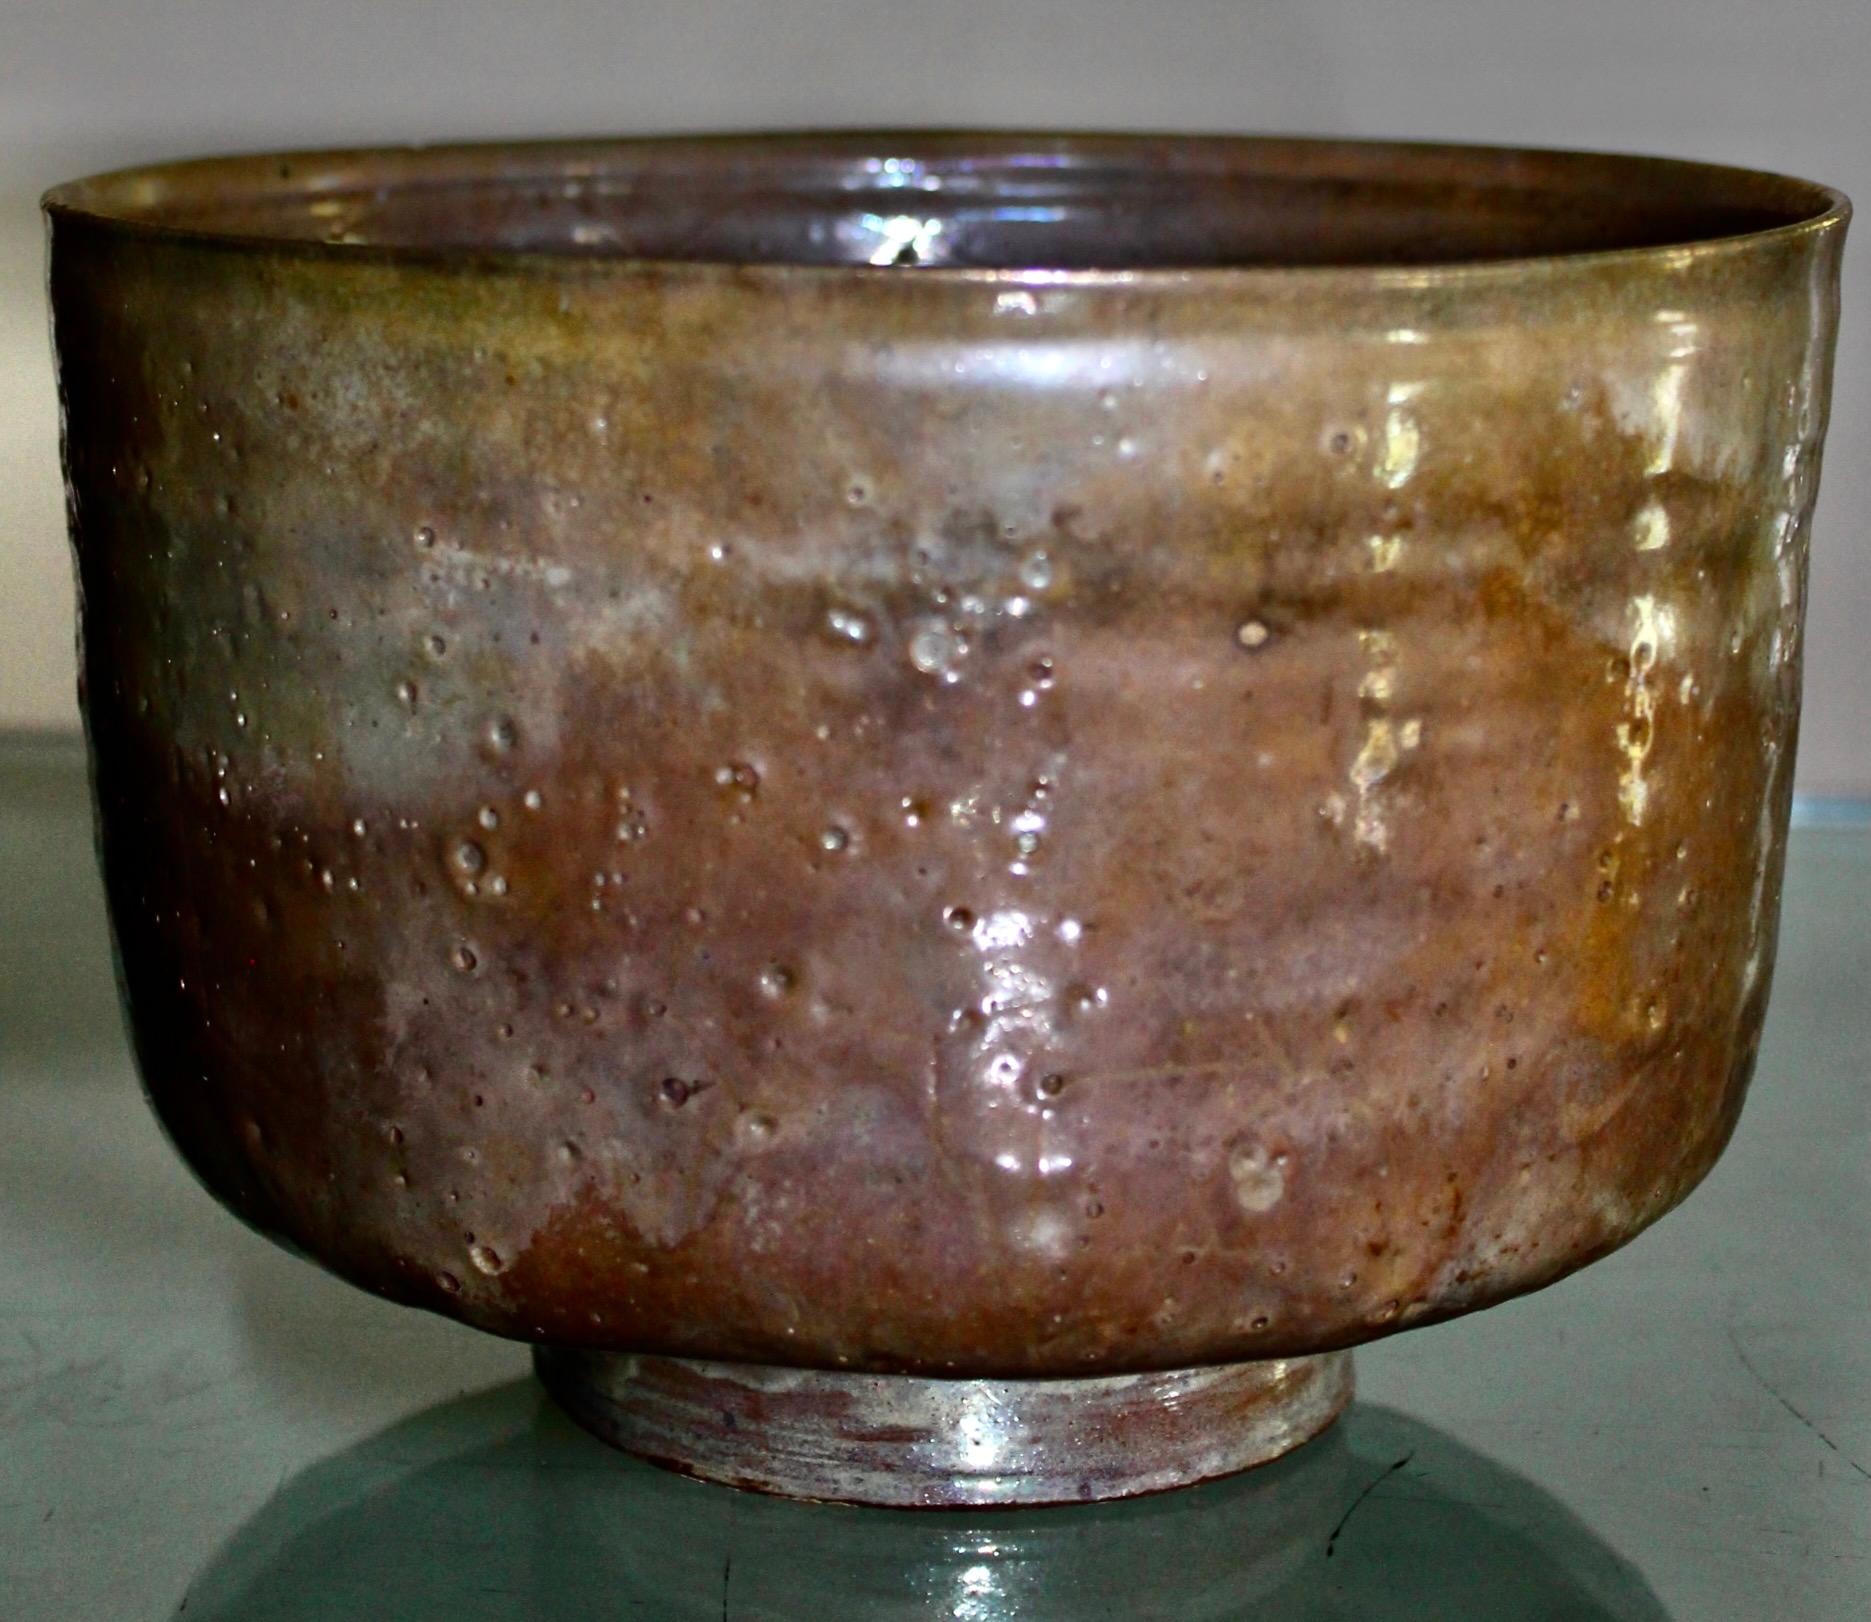 A beautiful glazed and very thin walled bowl. Signed on bottom.